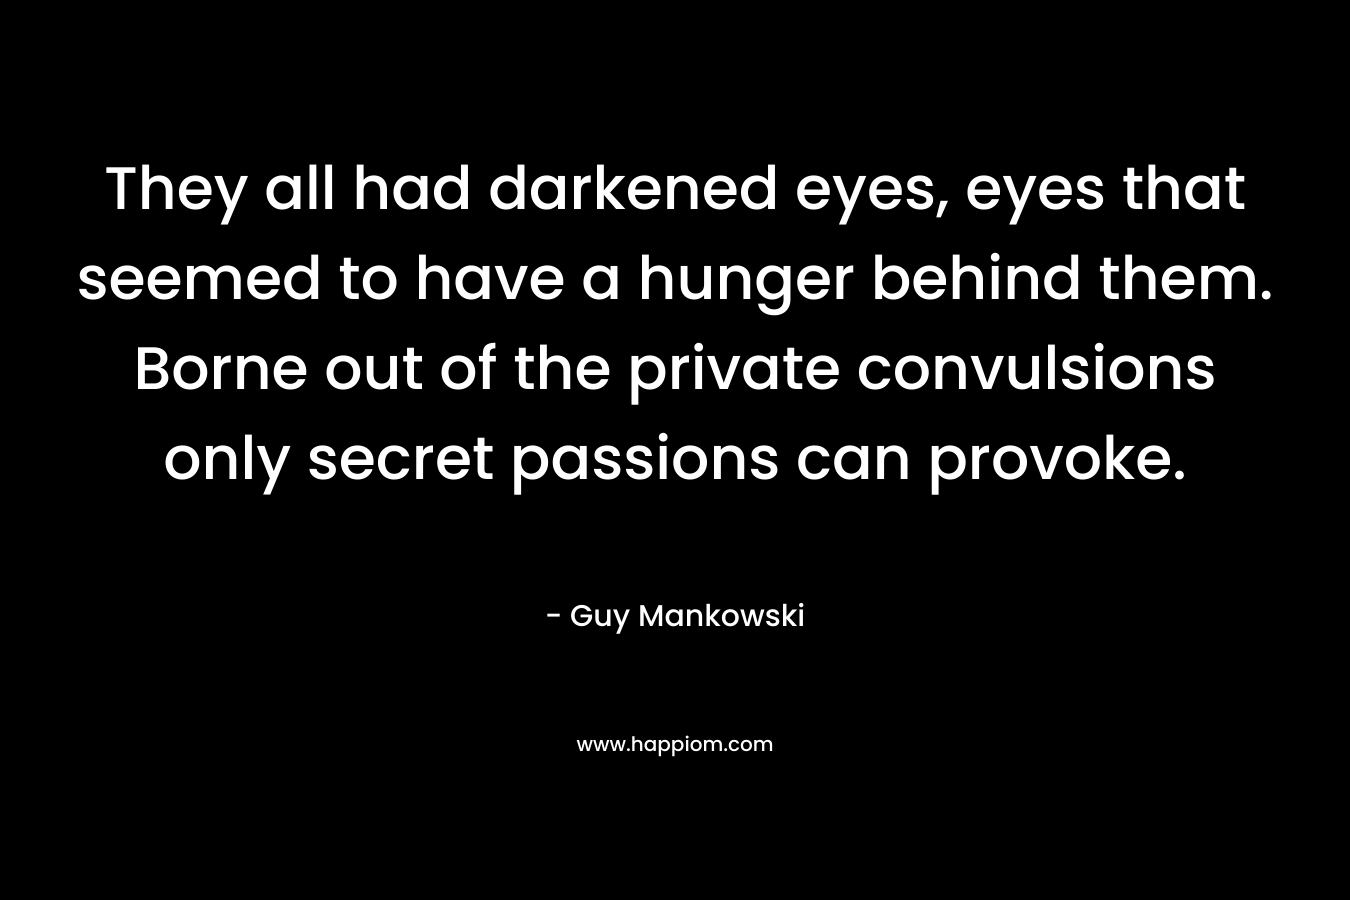 They all had darkened eyes, eyes that seemed to have a hunger behind them. Borne out of the private convulsions only secret passions can provoke. – Guy Mankowski